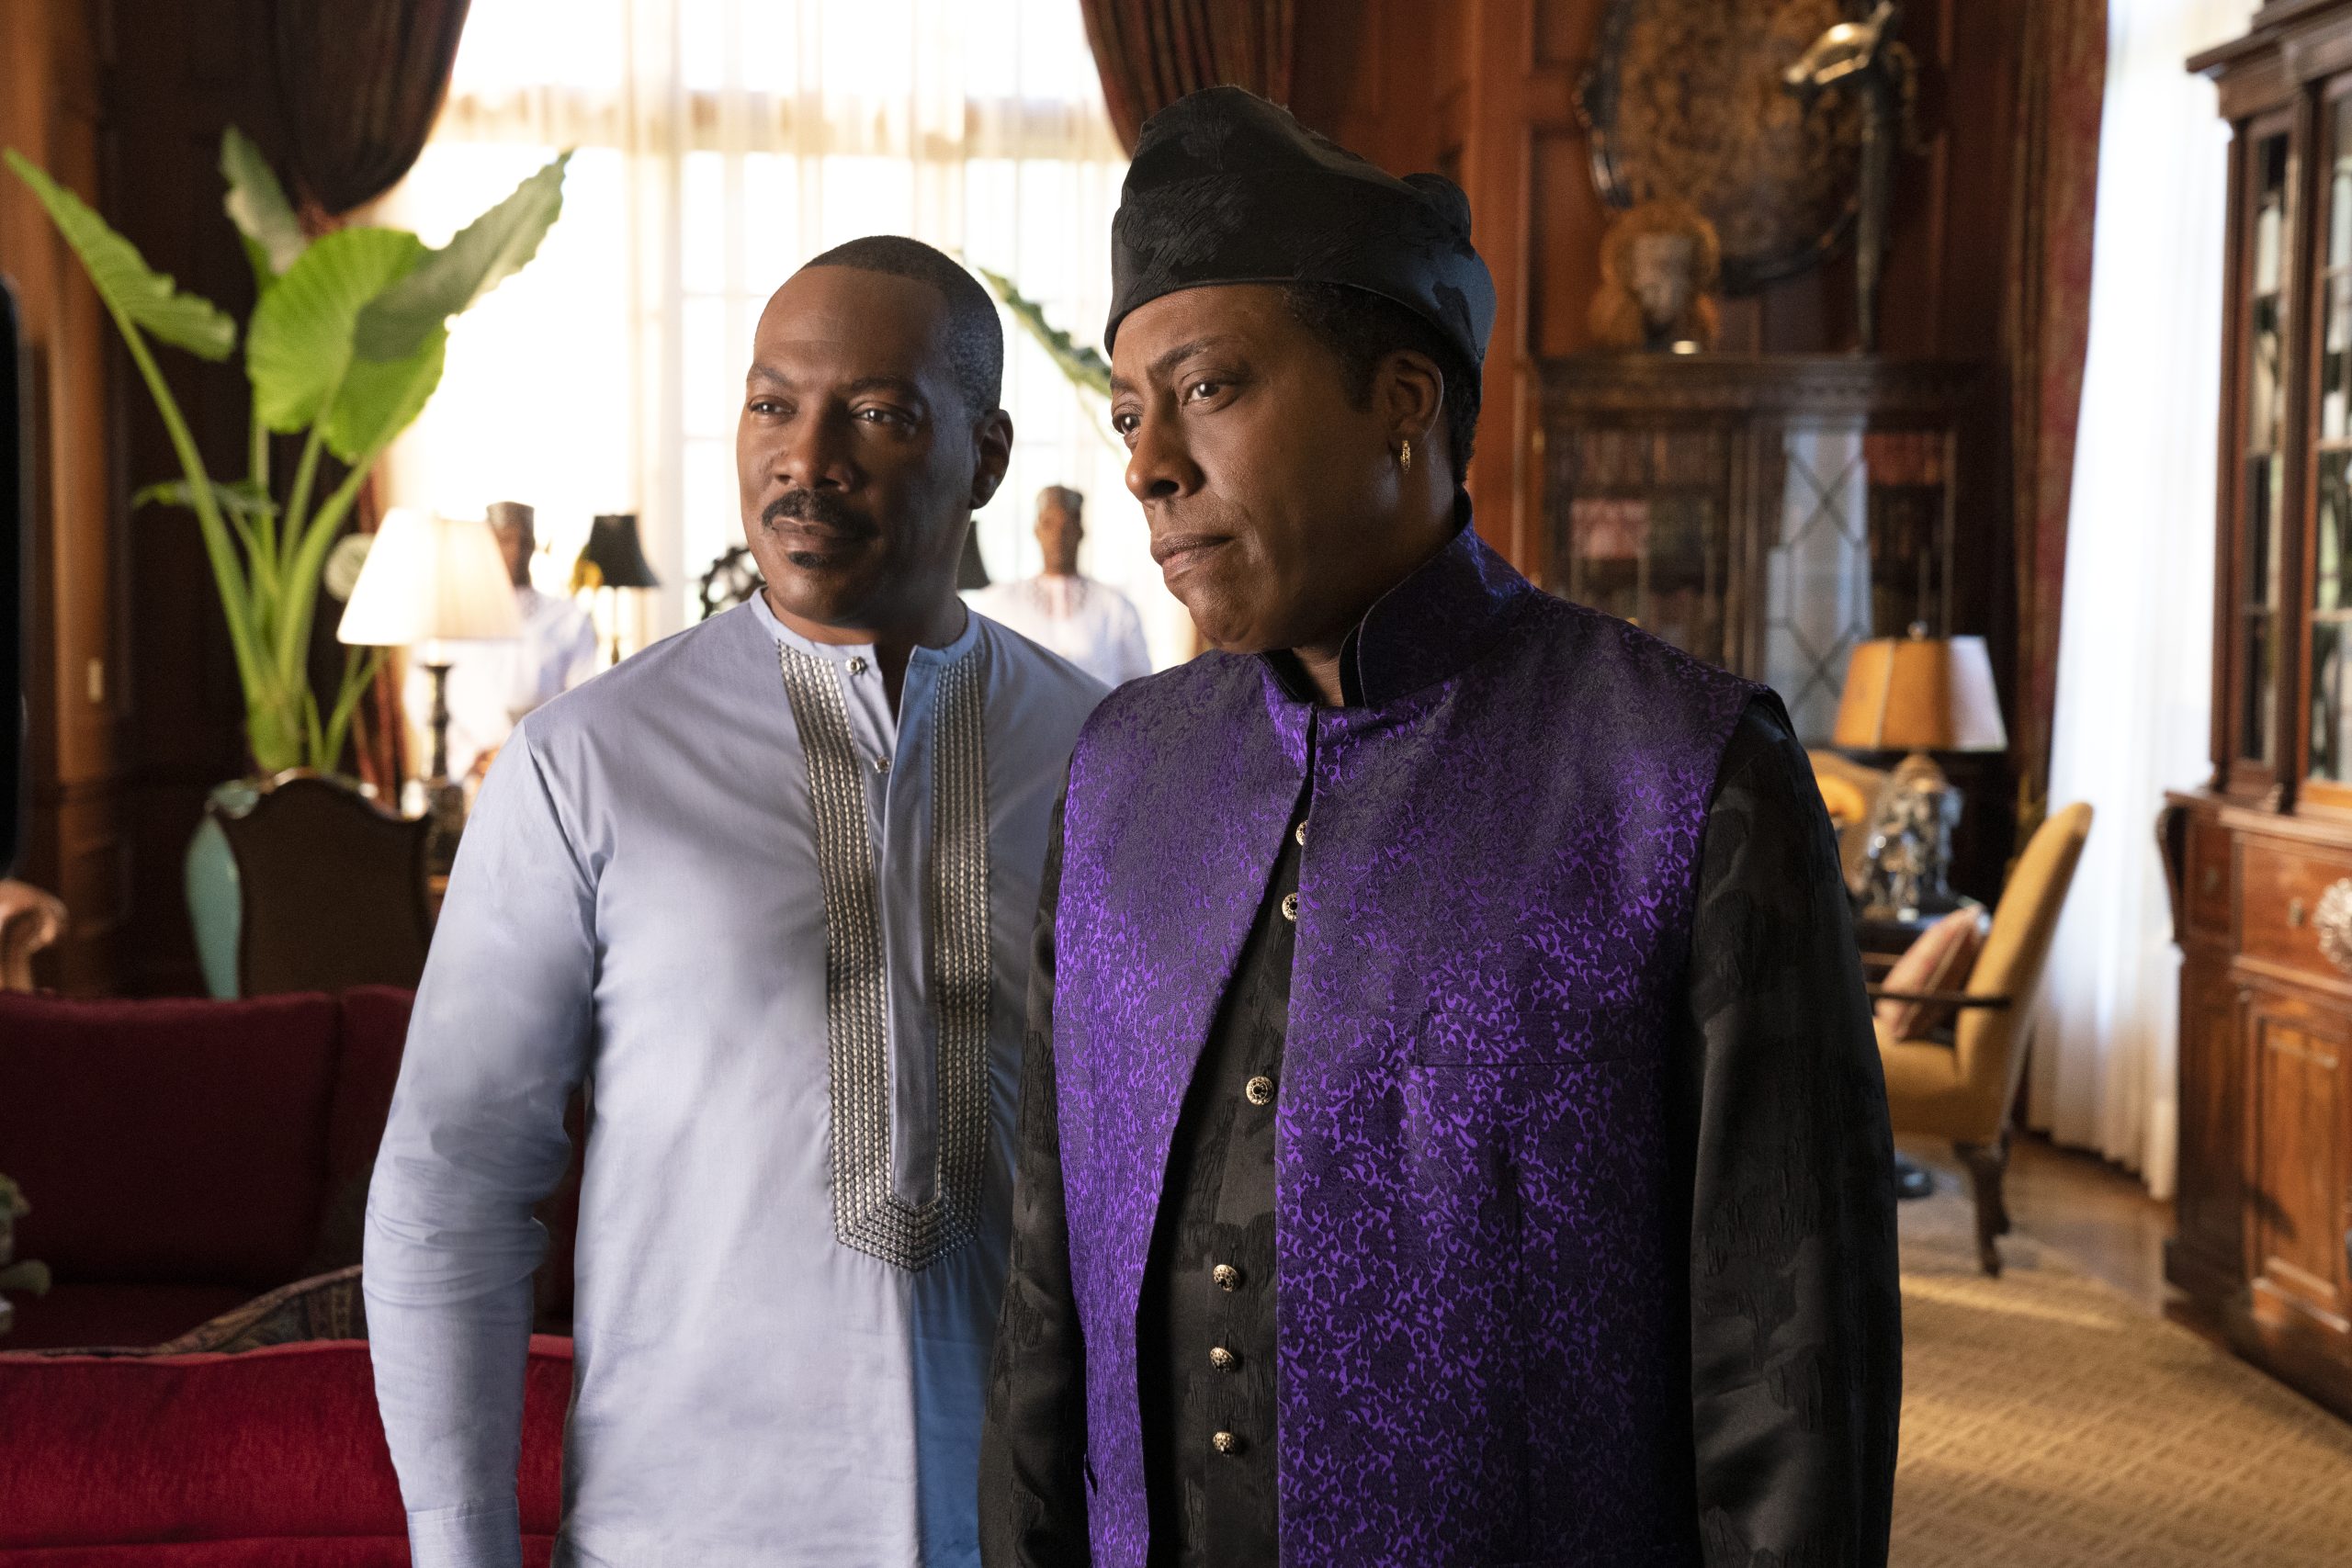 Eddie Murphy and Arsenio Hall star in COMING 2 AMERICA Photo: Quantrell D. Colbert © 2020 Paramount Pictures